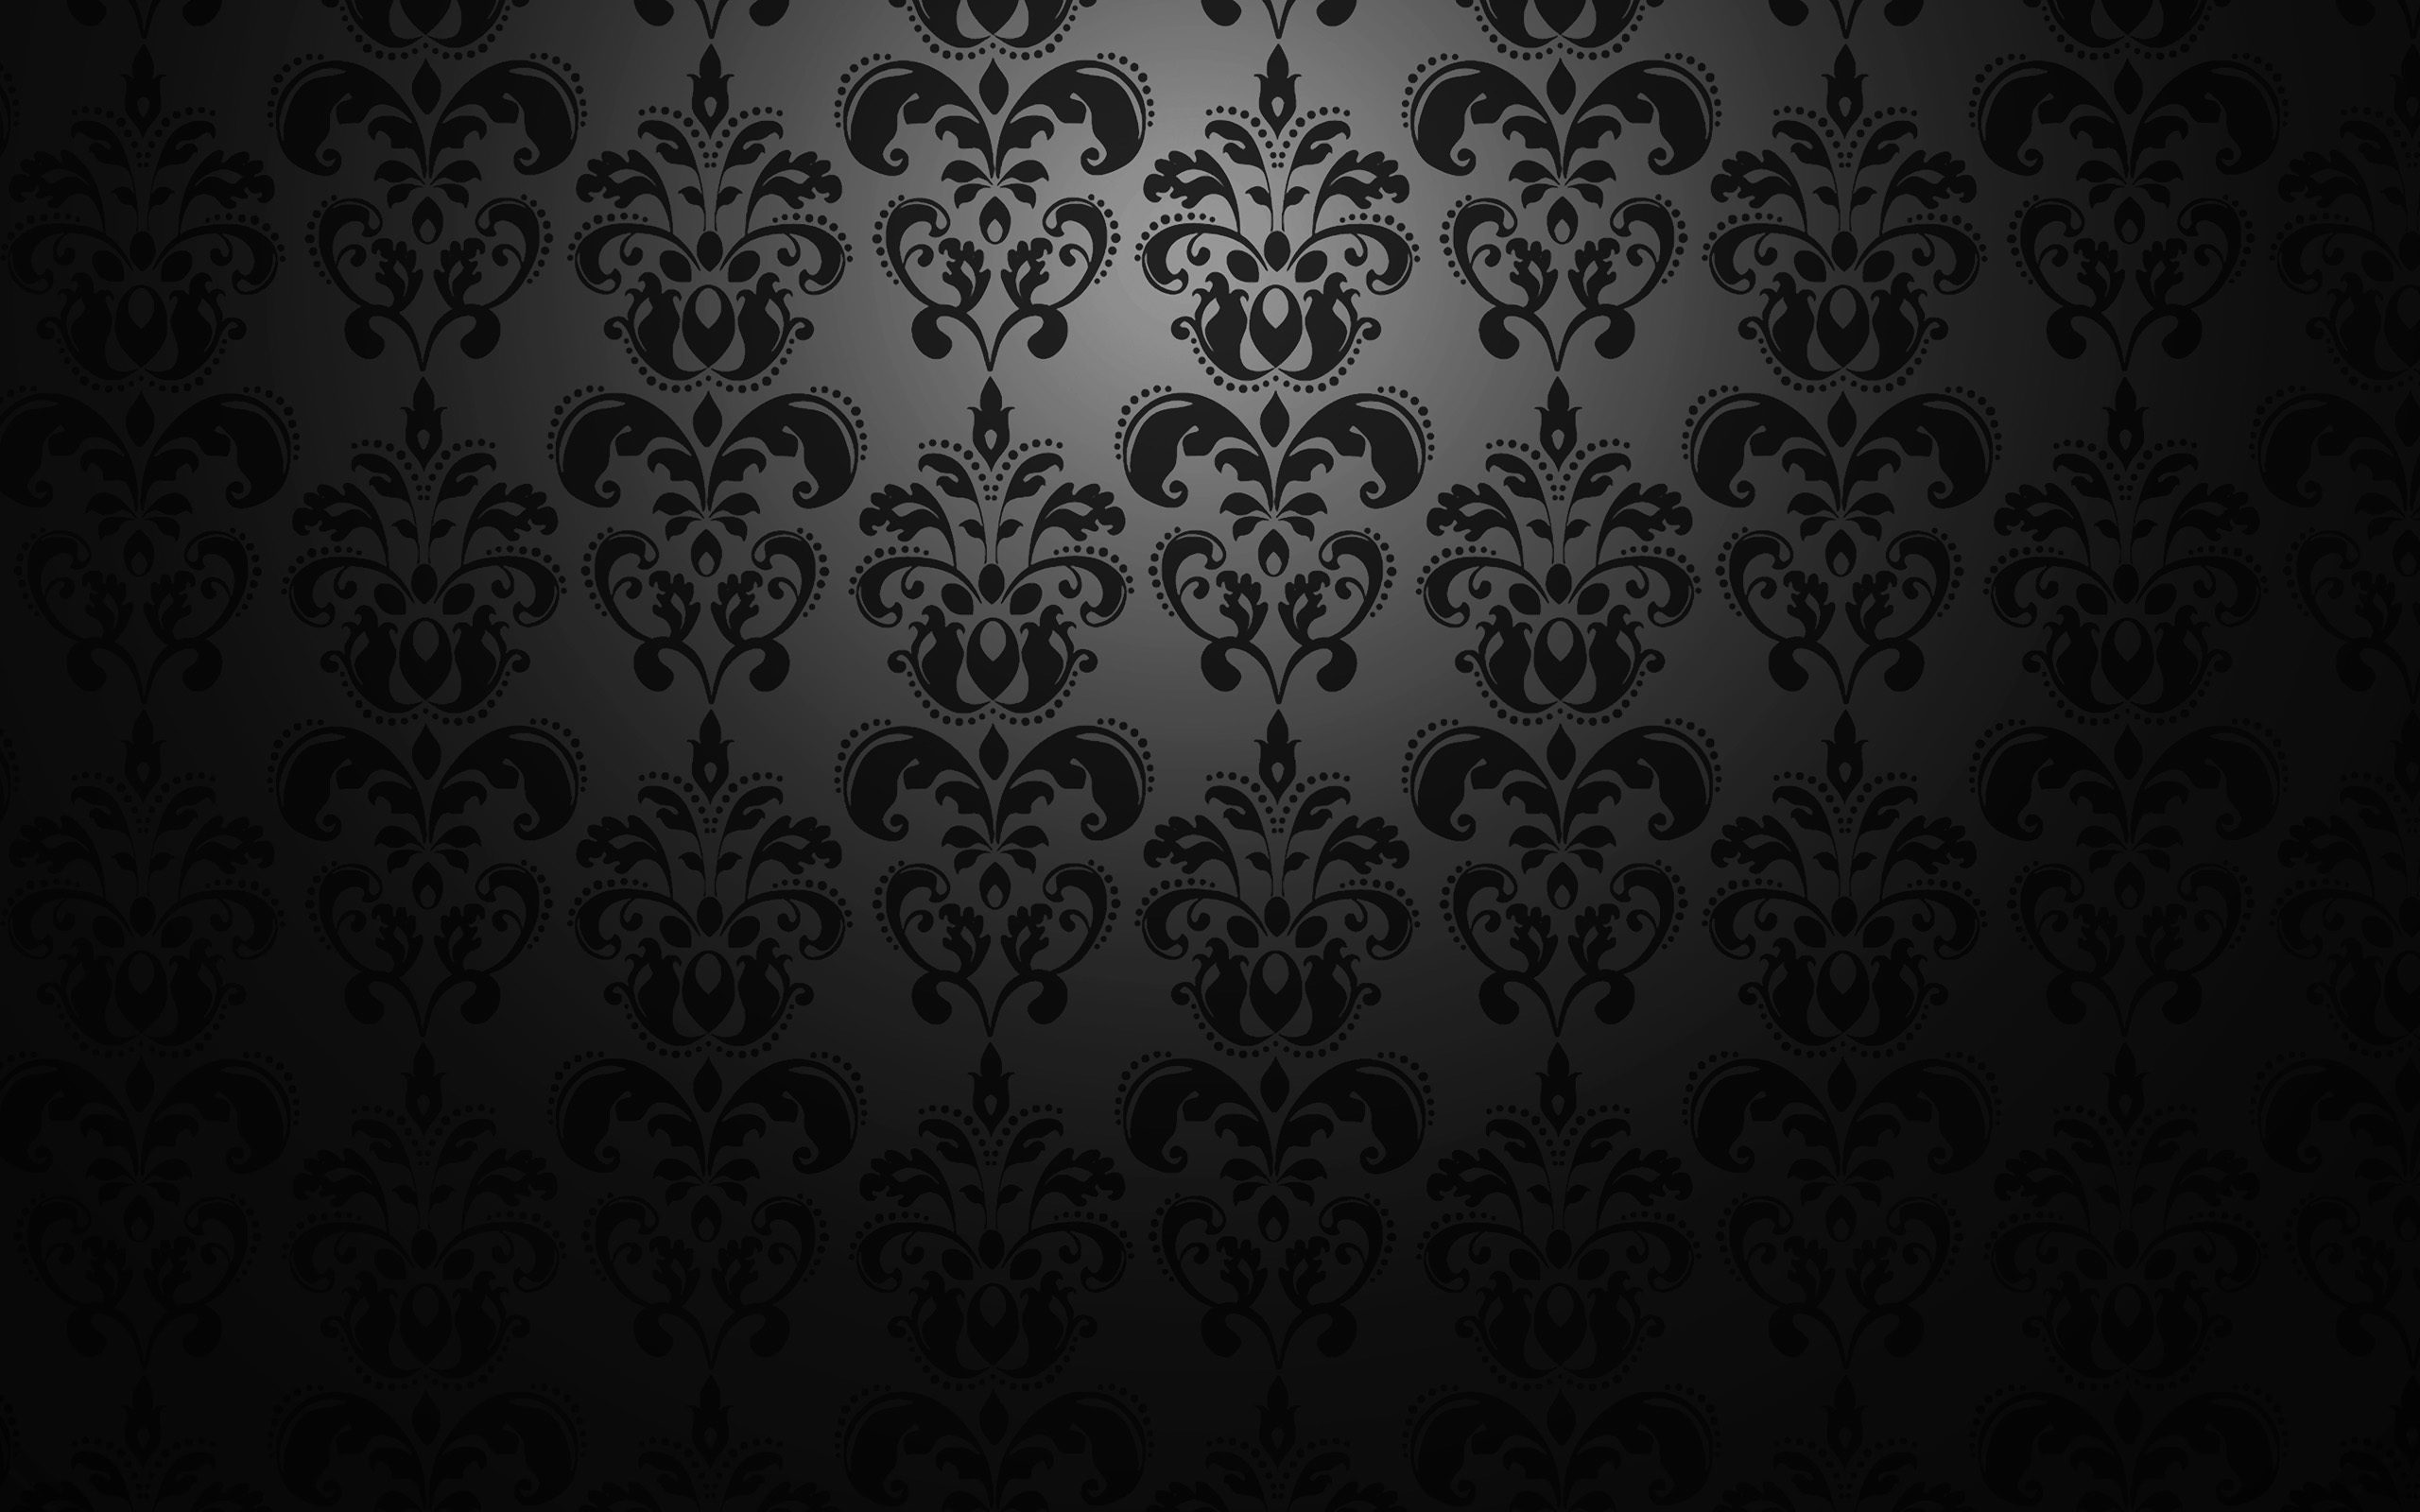  Background HQ Background Images